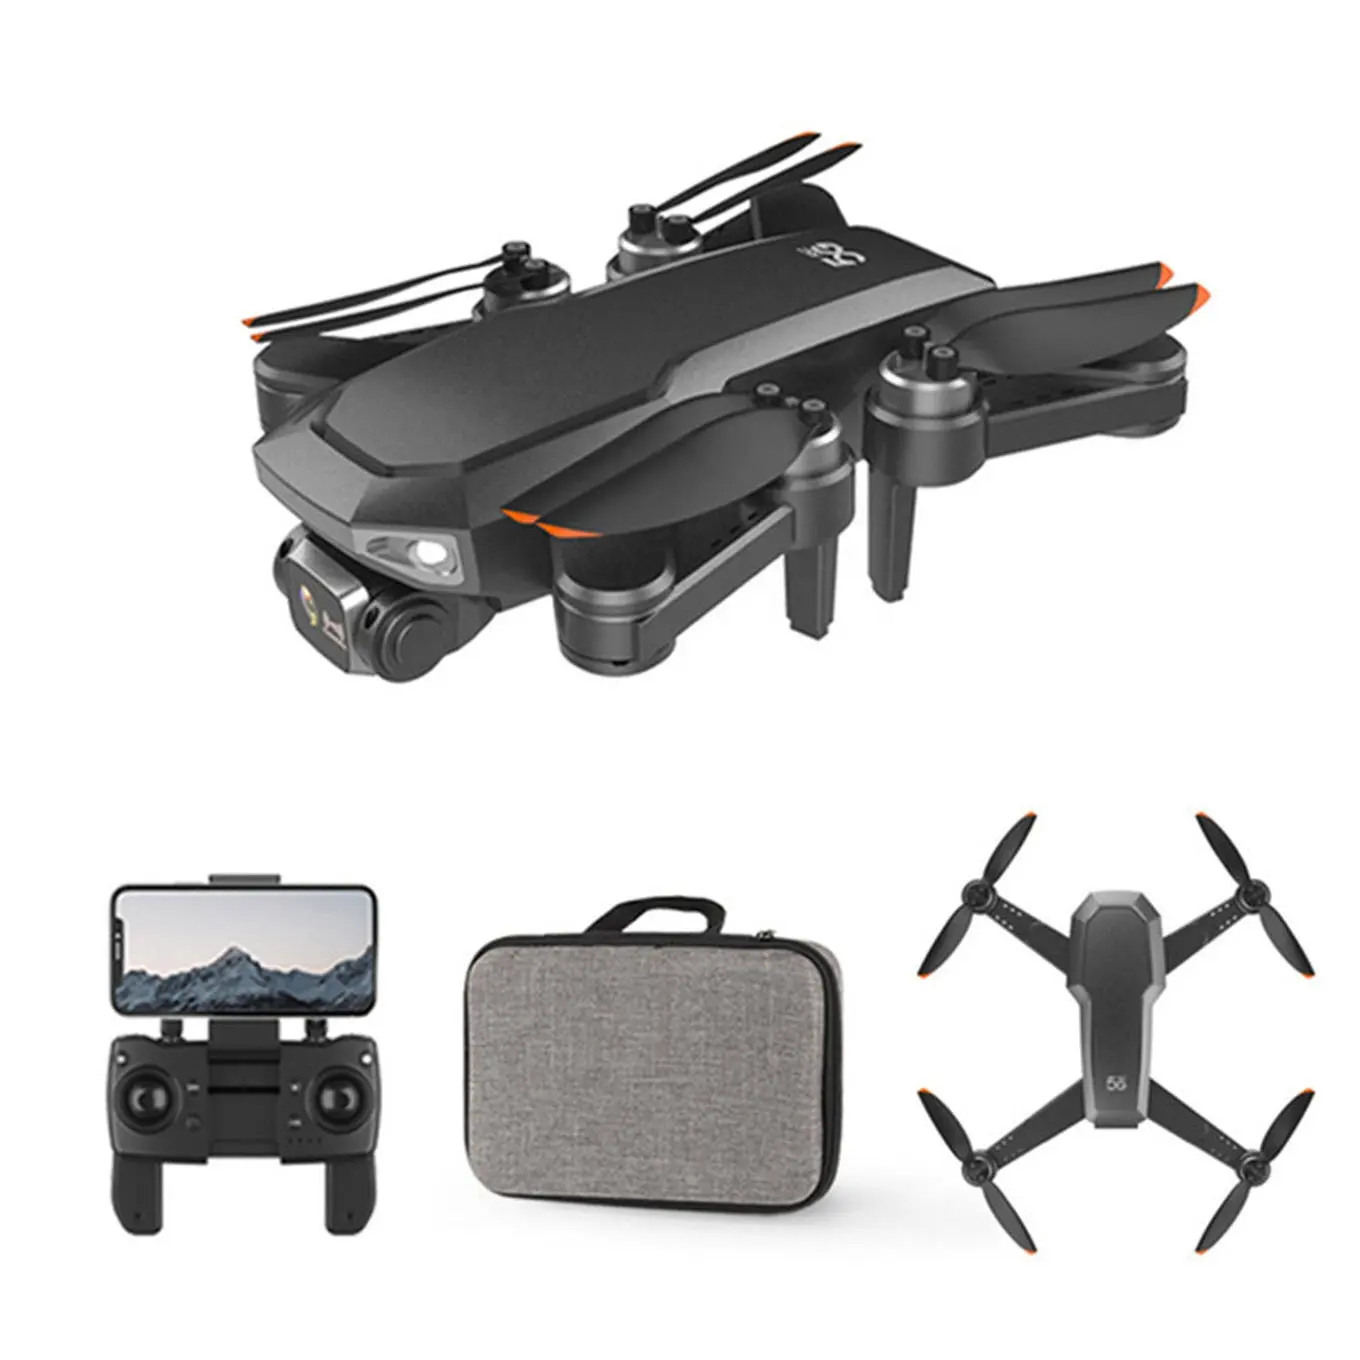 Takenoken Drone HD Camera X1 Pro Max 6K 2.4Gh Professional Aerial Photography Quadcopter Drones GPS Positions Obstacle Avoidance